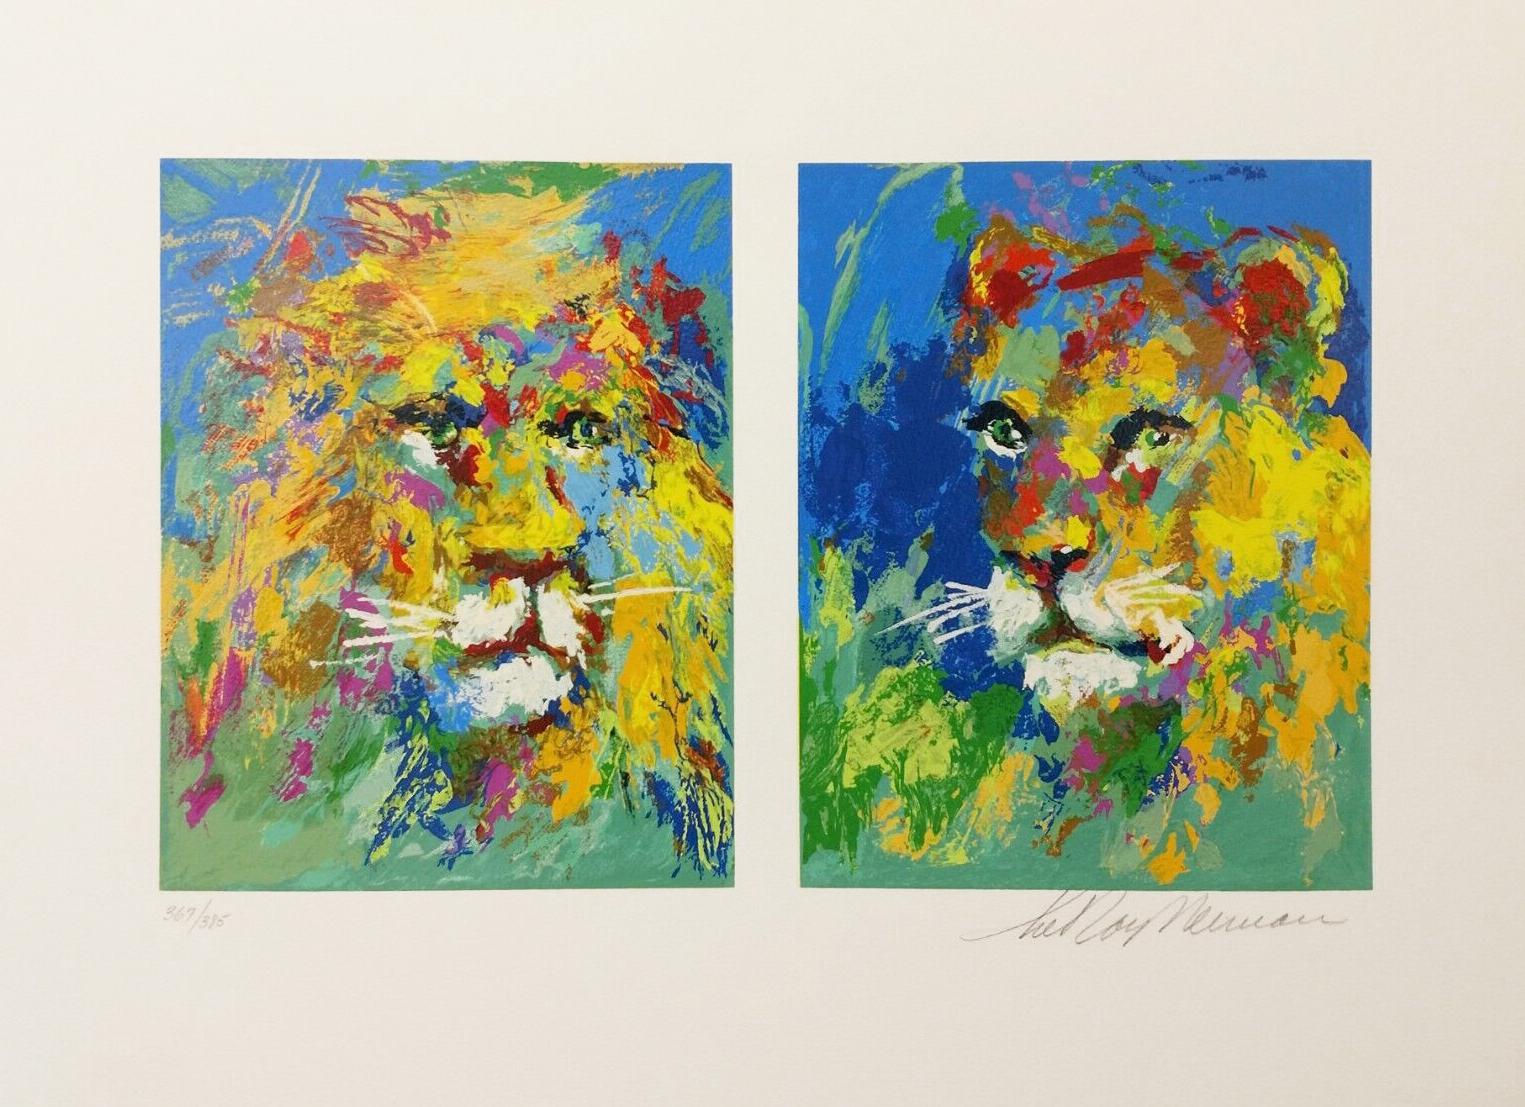 LION AND LIONESS - Print by Leroy Neiman